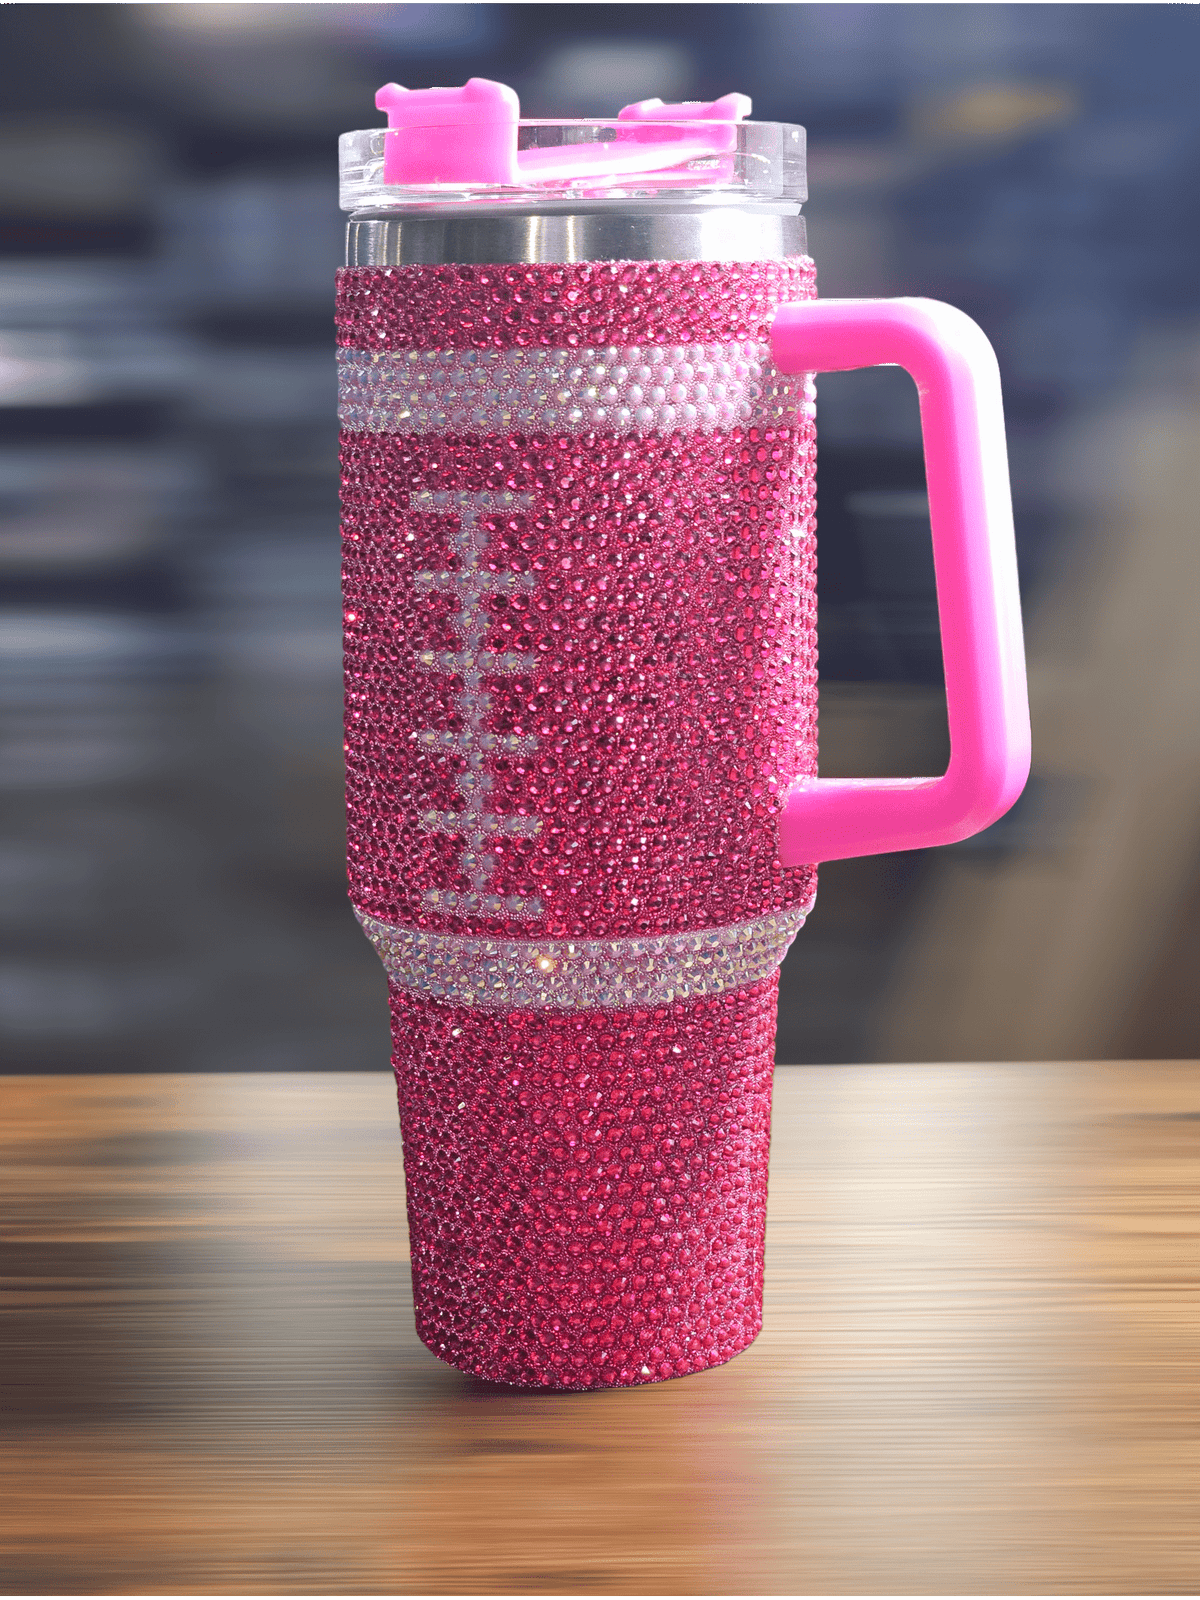 Sparkling Football 40oz Stainless Steel Tumbler - Luxury Rhinestone Encrusted, Insulated Drinkware for Sports Fans